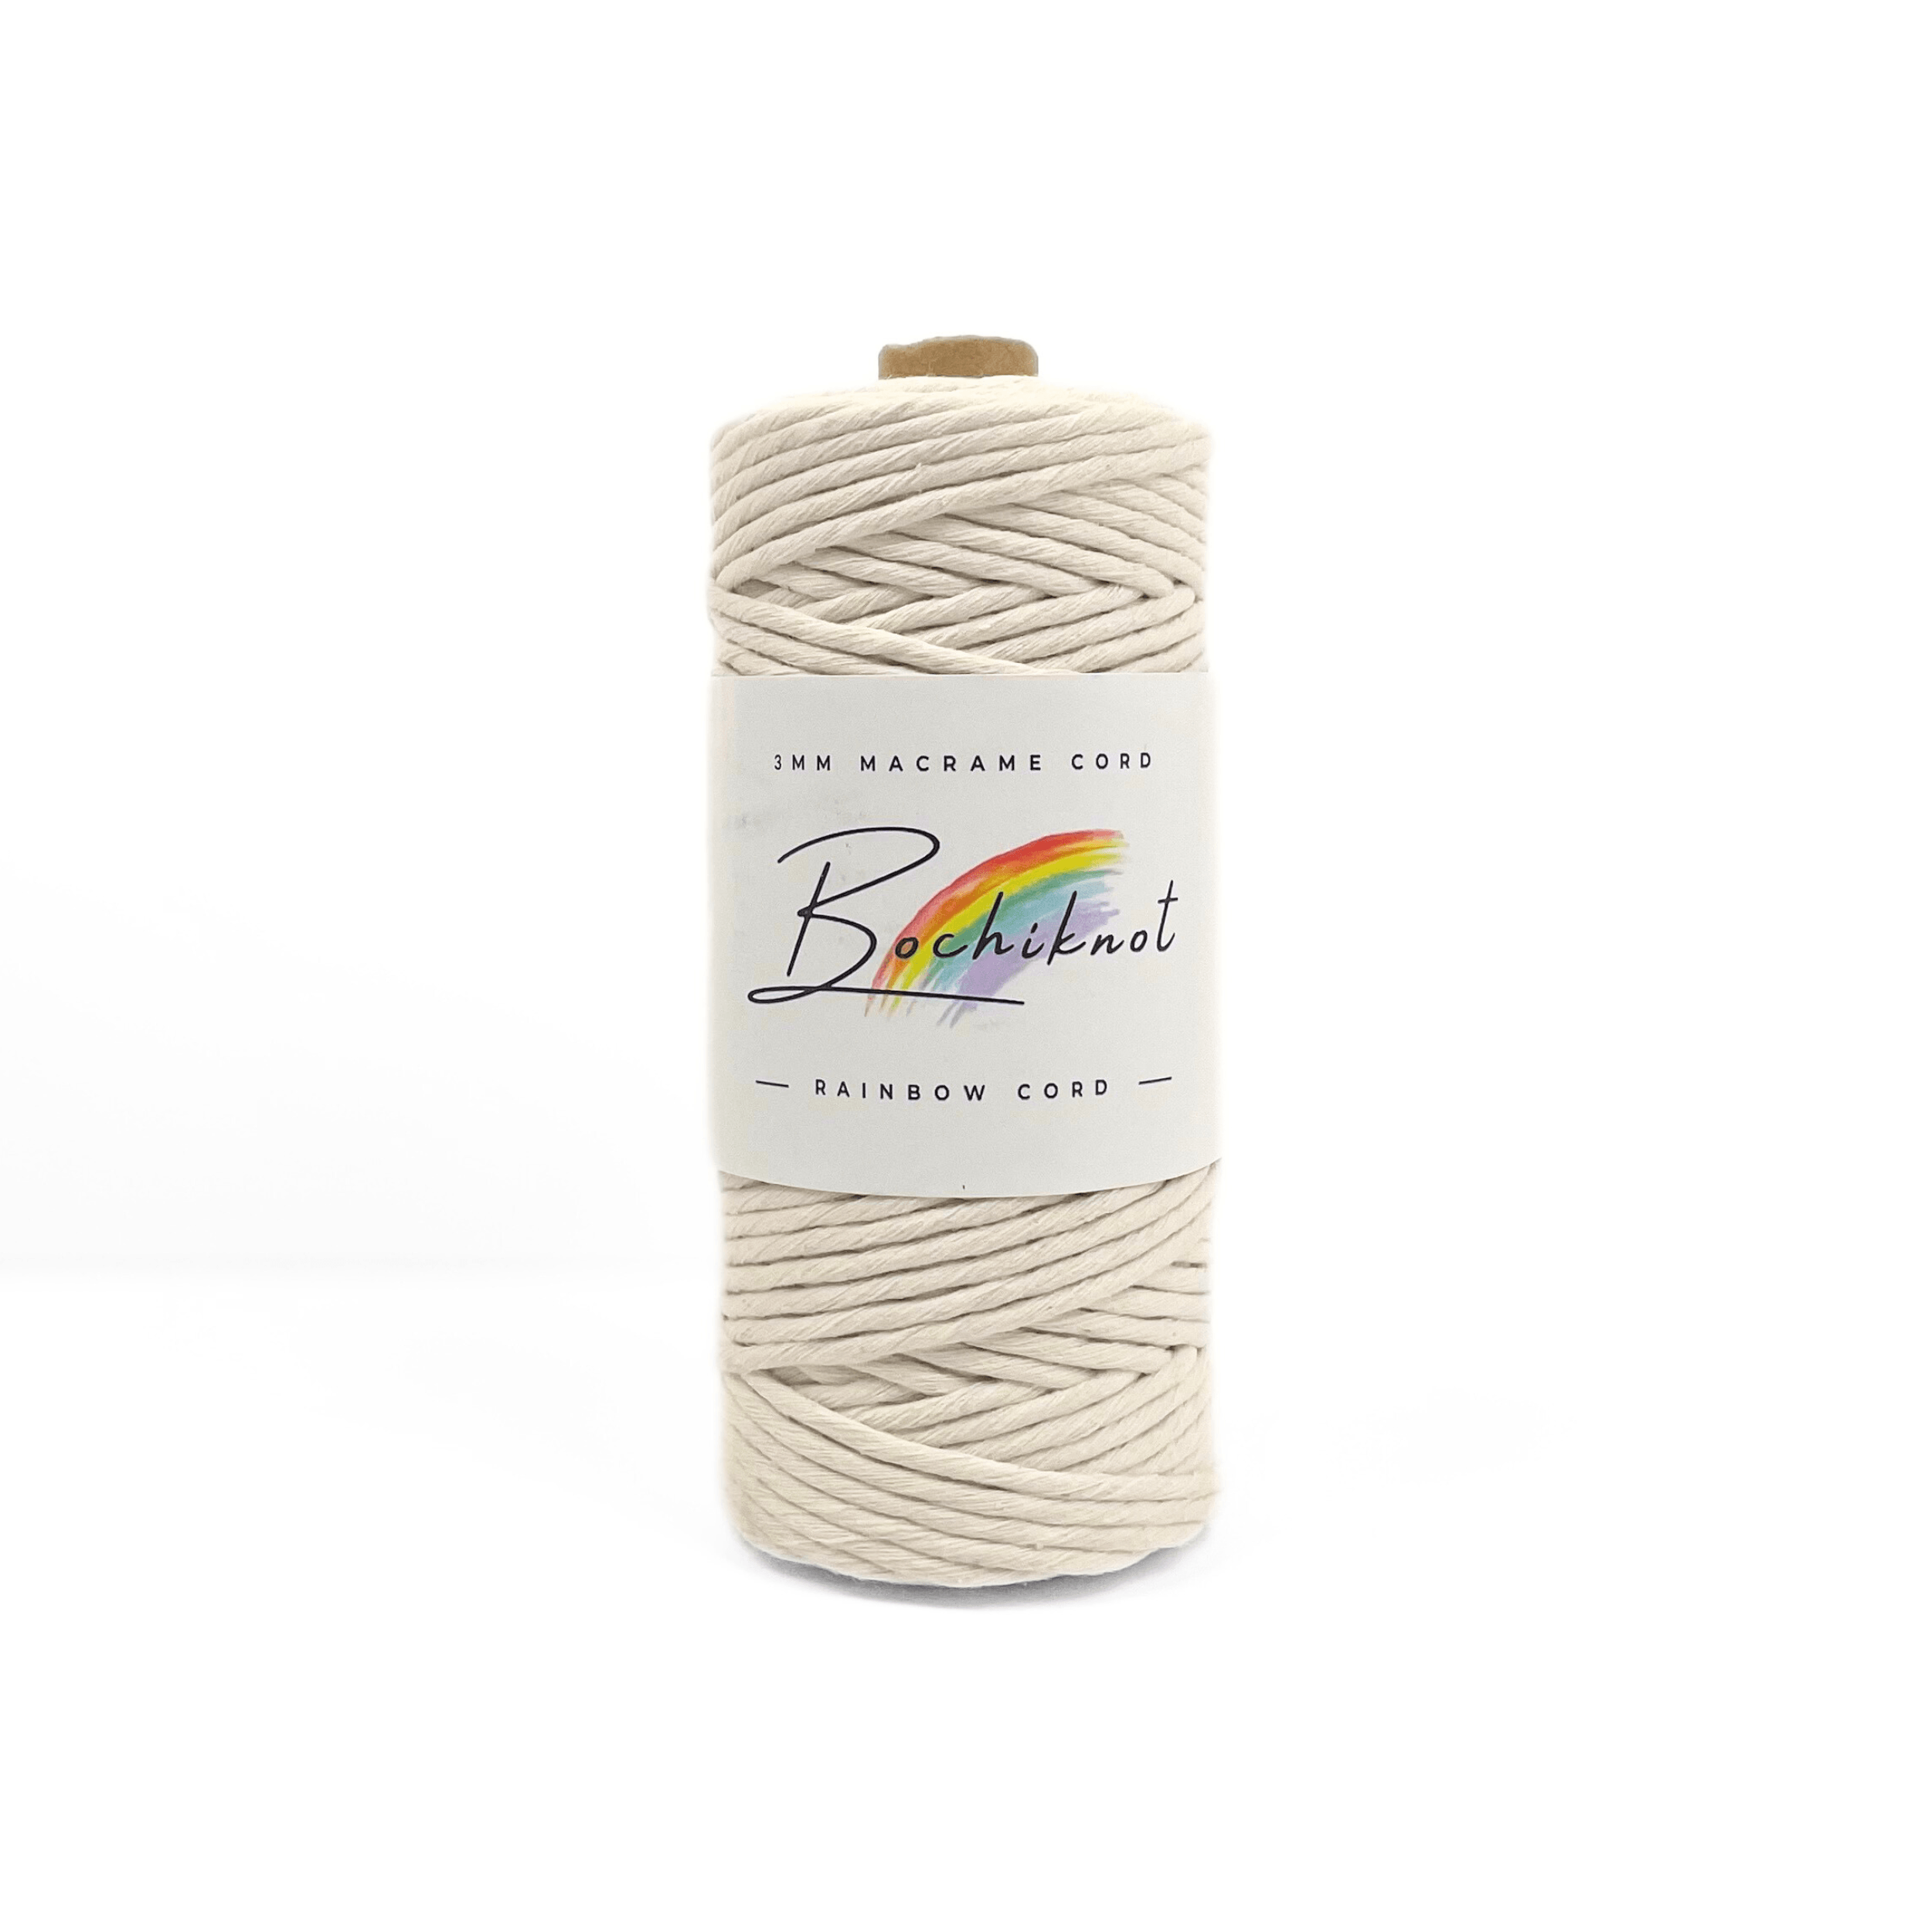 BOCHIKNOT Macrame 9mm Cord x 50yds, Color String Single Strand Twist  Cotton Rope 2mm 3mm 5mm 9mm for Macrame & Knotting